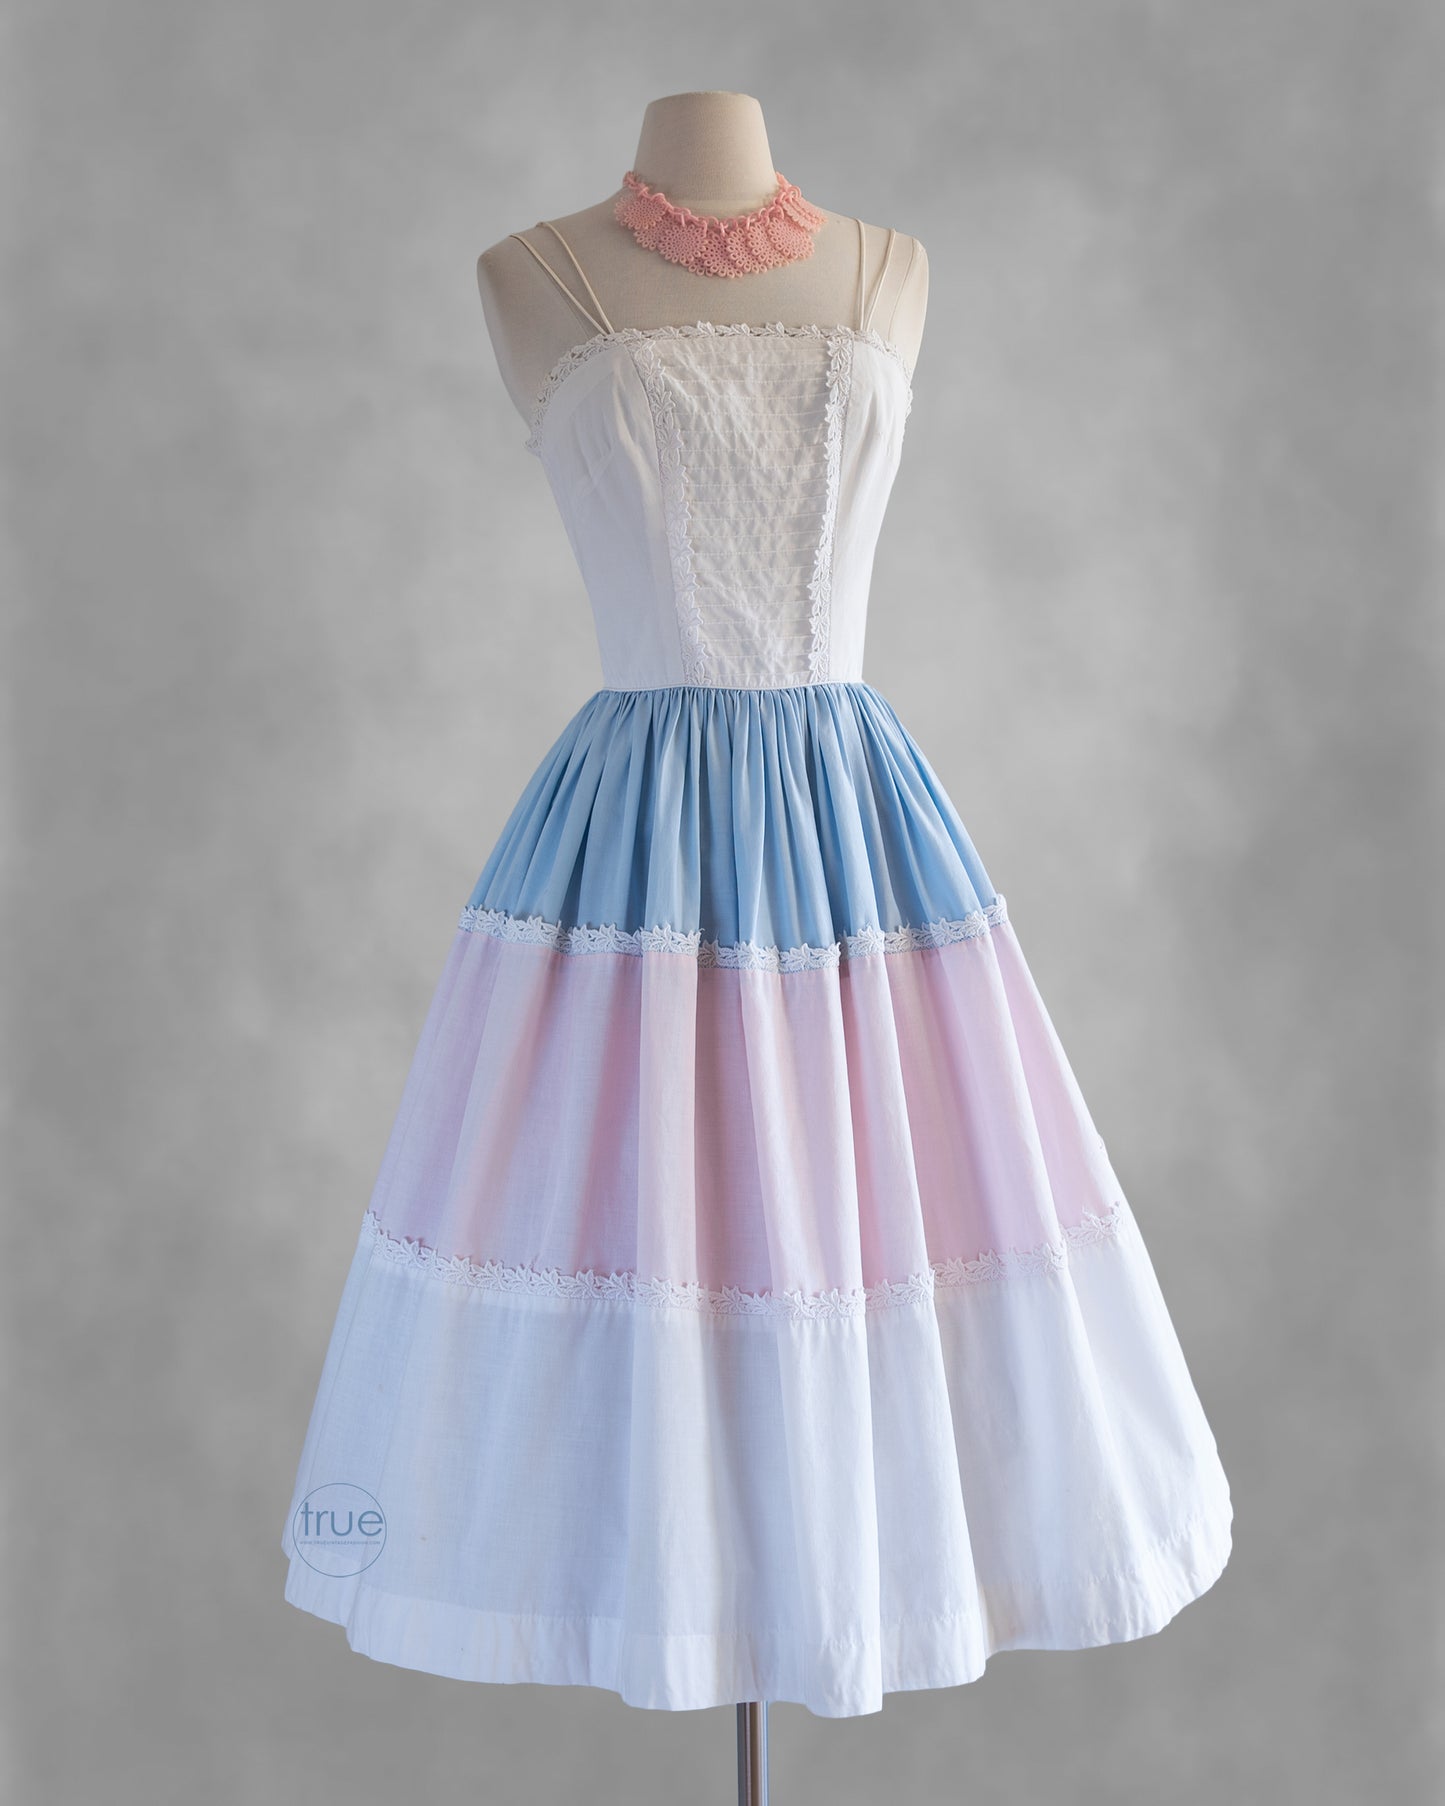 vintage 1950's dress ...sweetest EVER an Arkay white pink & blue cotton sundress